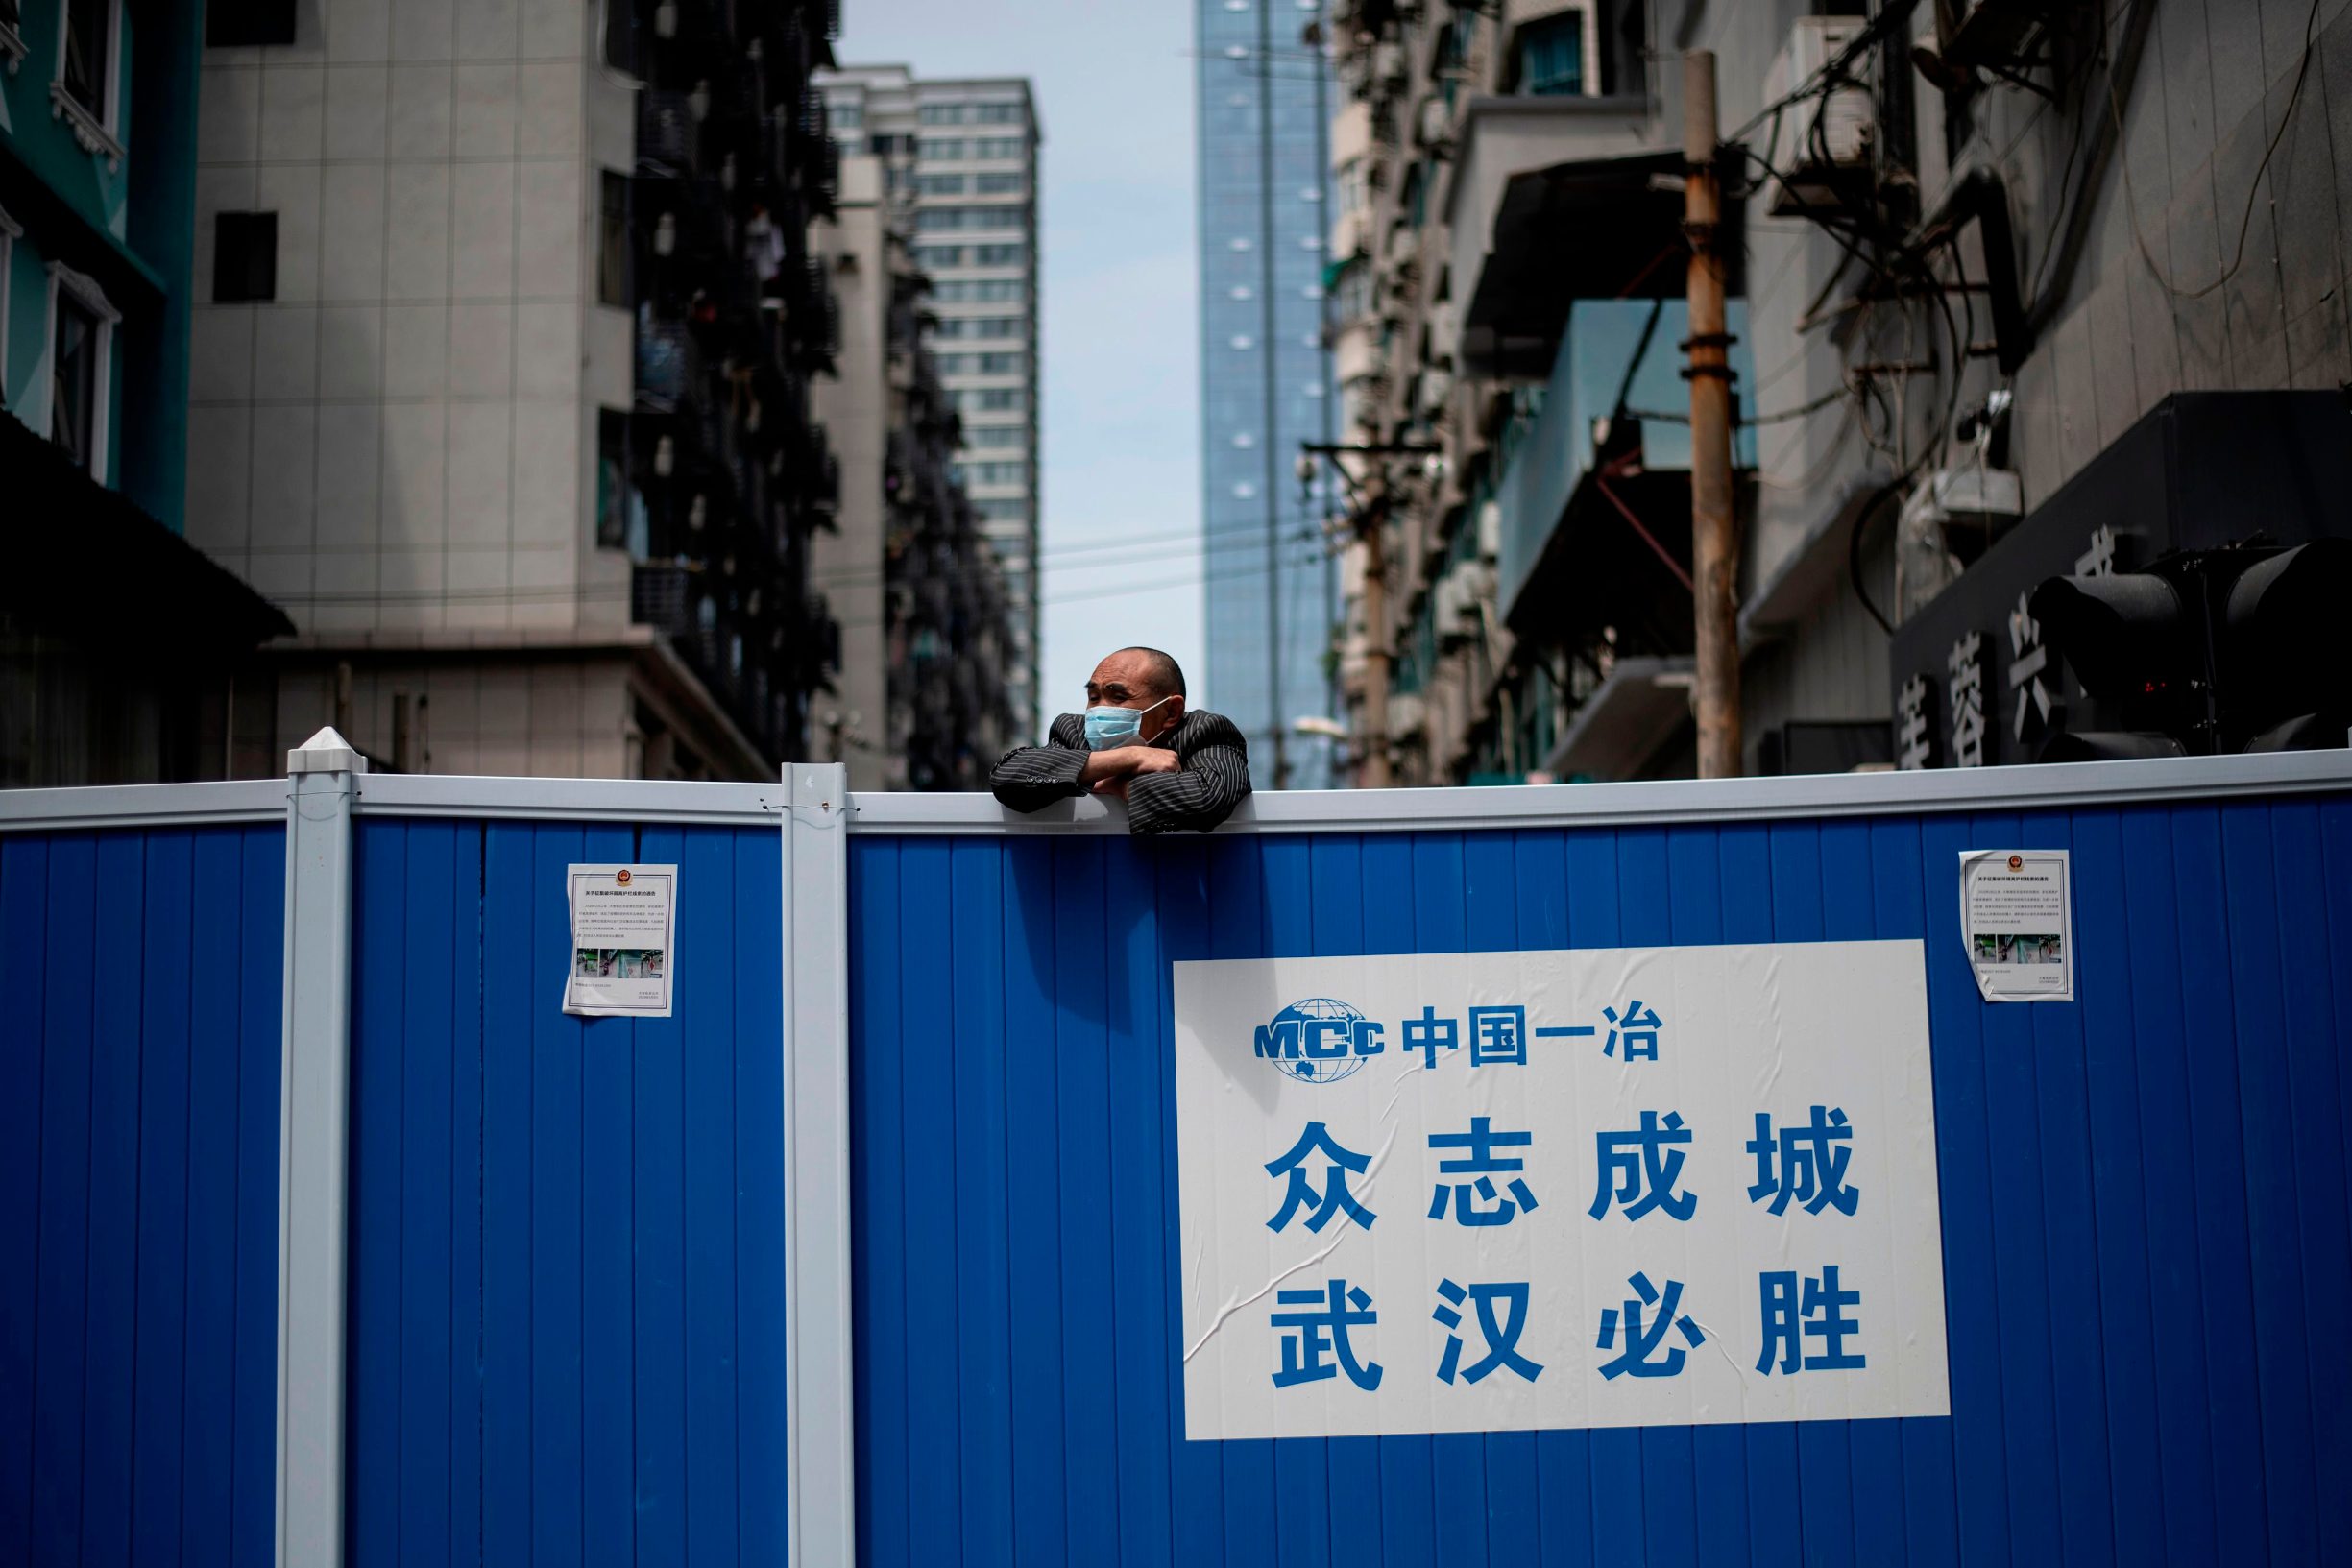 A man wearing a face mask looks over a barricade set up to keep people out of a residential compound in Wuhan in China's central Hubei province on April 14, 2020. (Photo by NOEL CELIS / AFP)